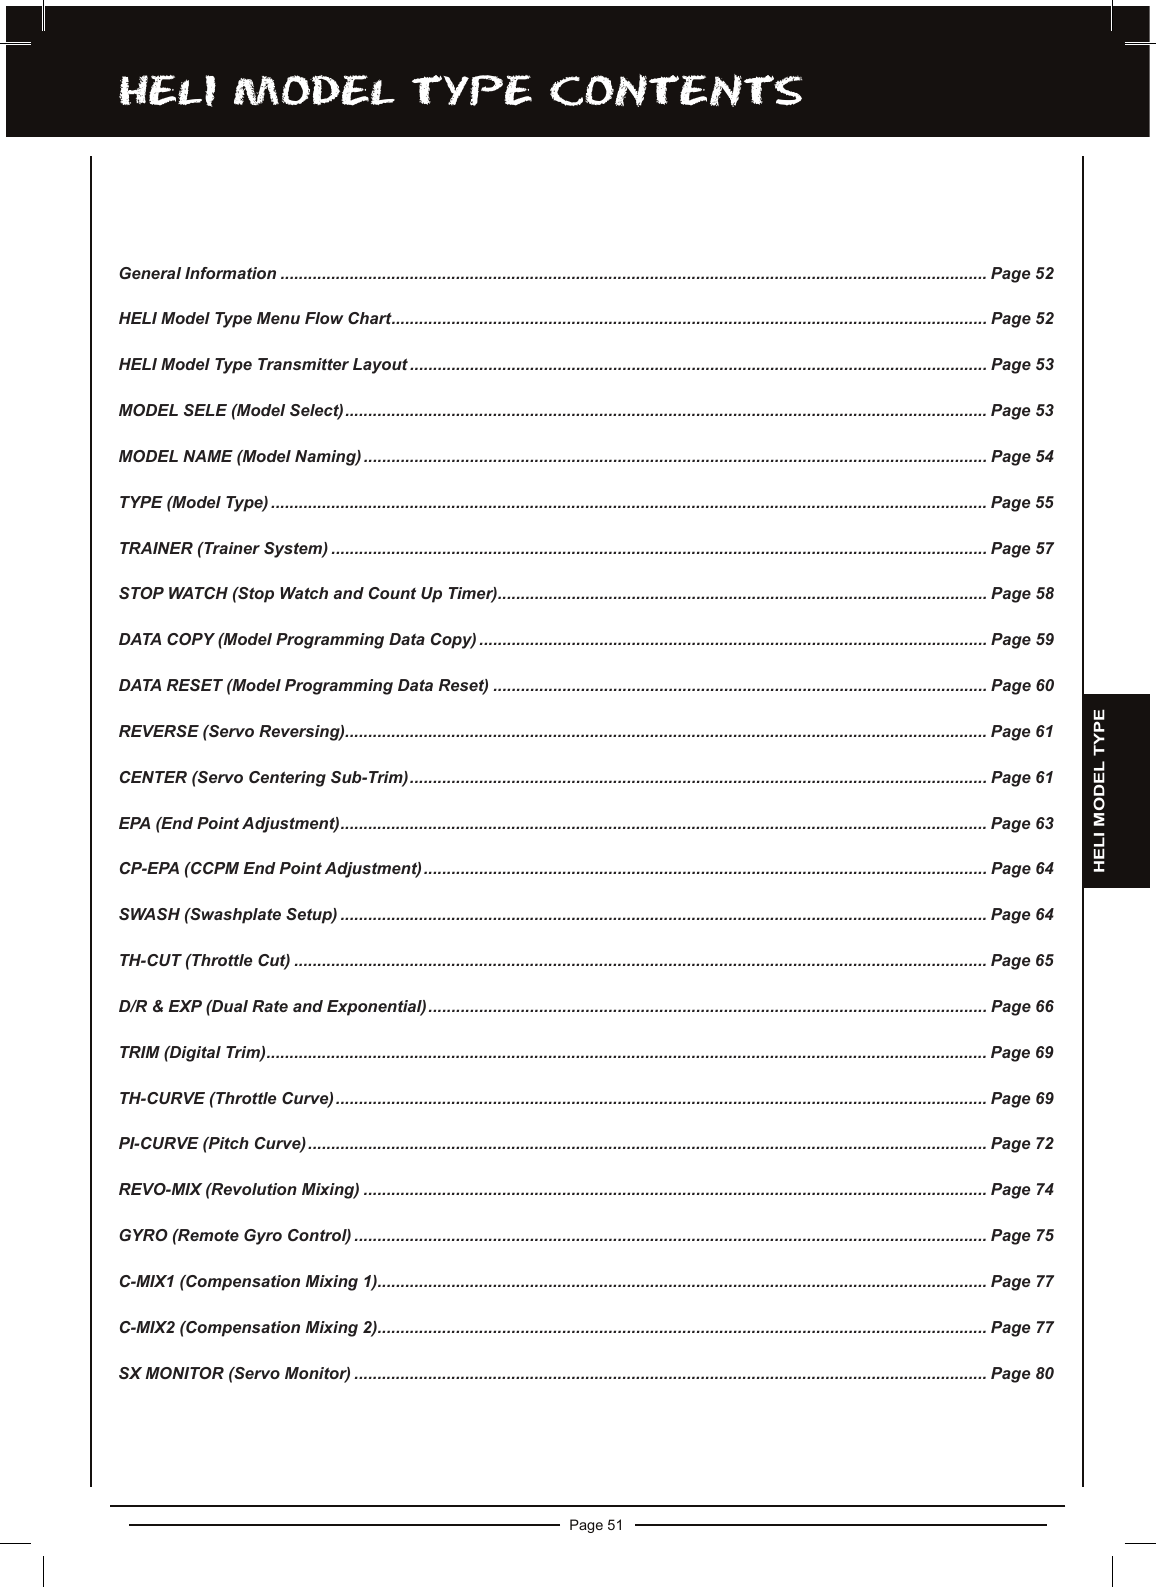 Page 51hELi MODEL TyPE cOnTEnTSGeneral Information ......................................................................................................................................................... Page 52HELI Model Type Menu Flow Chart................................................................................................................................. Page 52HELI Model Type Transmitter Layout ............................................................................................................................. Page 53MODEL SELE (Model Select)........................................................................................................................................... Page 53MODEL NAME (Model Naming)....................................................................................................................................... Page 54TYPE (Model Type) ........................................................................................................................................................... Page 55TRAINER (Trainer System) .............................................................................................................................................. Page 57STOP WATCH (Stop Watch and Count Up Timer).......................................................................................................... Page 58DATA COPY (Model Programming Data Copy) .............................................................................................................. Page 59DATA RESET (Model Programming Data Reset) ........................................................................................................... Page 60REVERSE (Servo Reversing)........................................................................................................................................... Page 61CENTER (Servo Centering Sub-Trim)............................................................................................................................. Page 61EPA (End Point Adjustment)............................................................................................................................................ Page 63CP-EPA (CCPM End Point Adjustment).......................................................................................................................... Page 64SWASH (Swashplate Setup) ............................................................................................................................................ Page 64TH-CUT (Throttle Cut) ...................................................................................................................................................... Page 65D/R &amp; EXP (Dual Rate and Exponential)......................................................................................................................... Page 66TRIM (Digital Trim)............................................................................................................................................................ Page 69TH-CURVE (Throttle Curve)............................................................................................................................................. Page 69PI-CURVE (Pitch Curve)................................................................................................................................................... Page 72REVO-MIX (Revolution Mixing) ....................................................................................................................................... Page 74GYRO (Remote Gyro Control) ......................................................................................................................................... Page 75C-MIX1 (Compensation Mixing 1).................................................................................................................................... Page 77C-MIX2 (Compensation Mixing 2).................................................................................................................................... Page 77SX MONITOR (Servo Monitor) ......................................................................................................................................... Page 80HELI MODEL TYPE